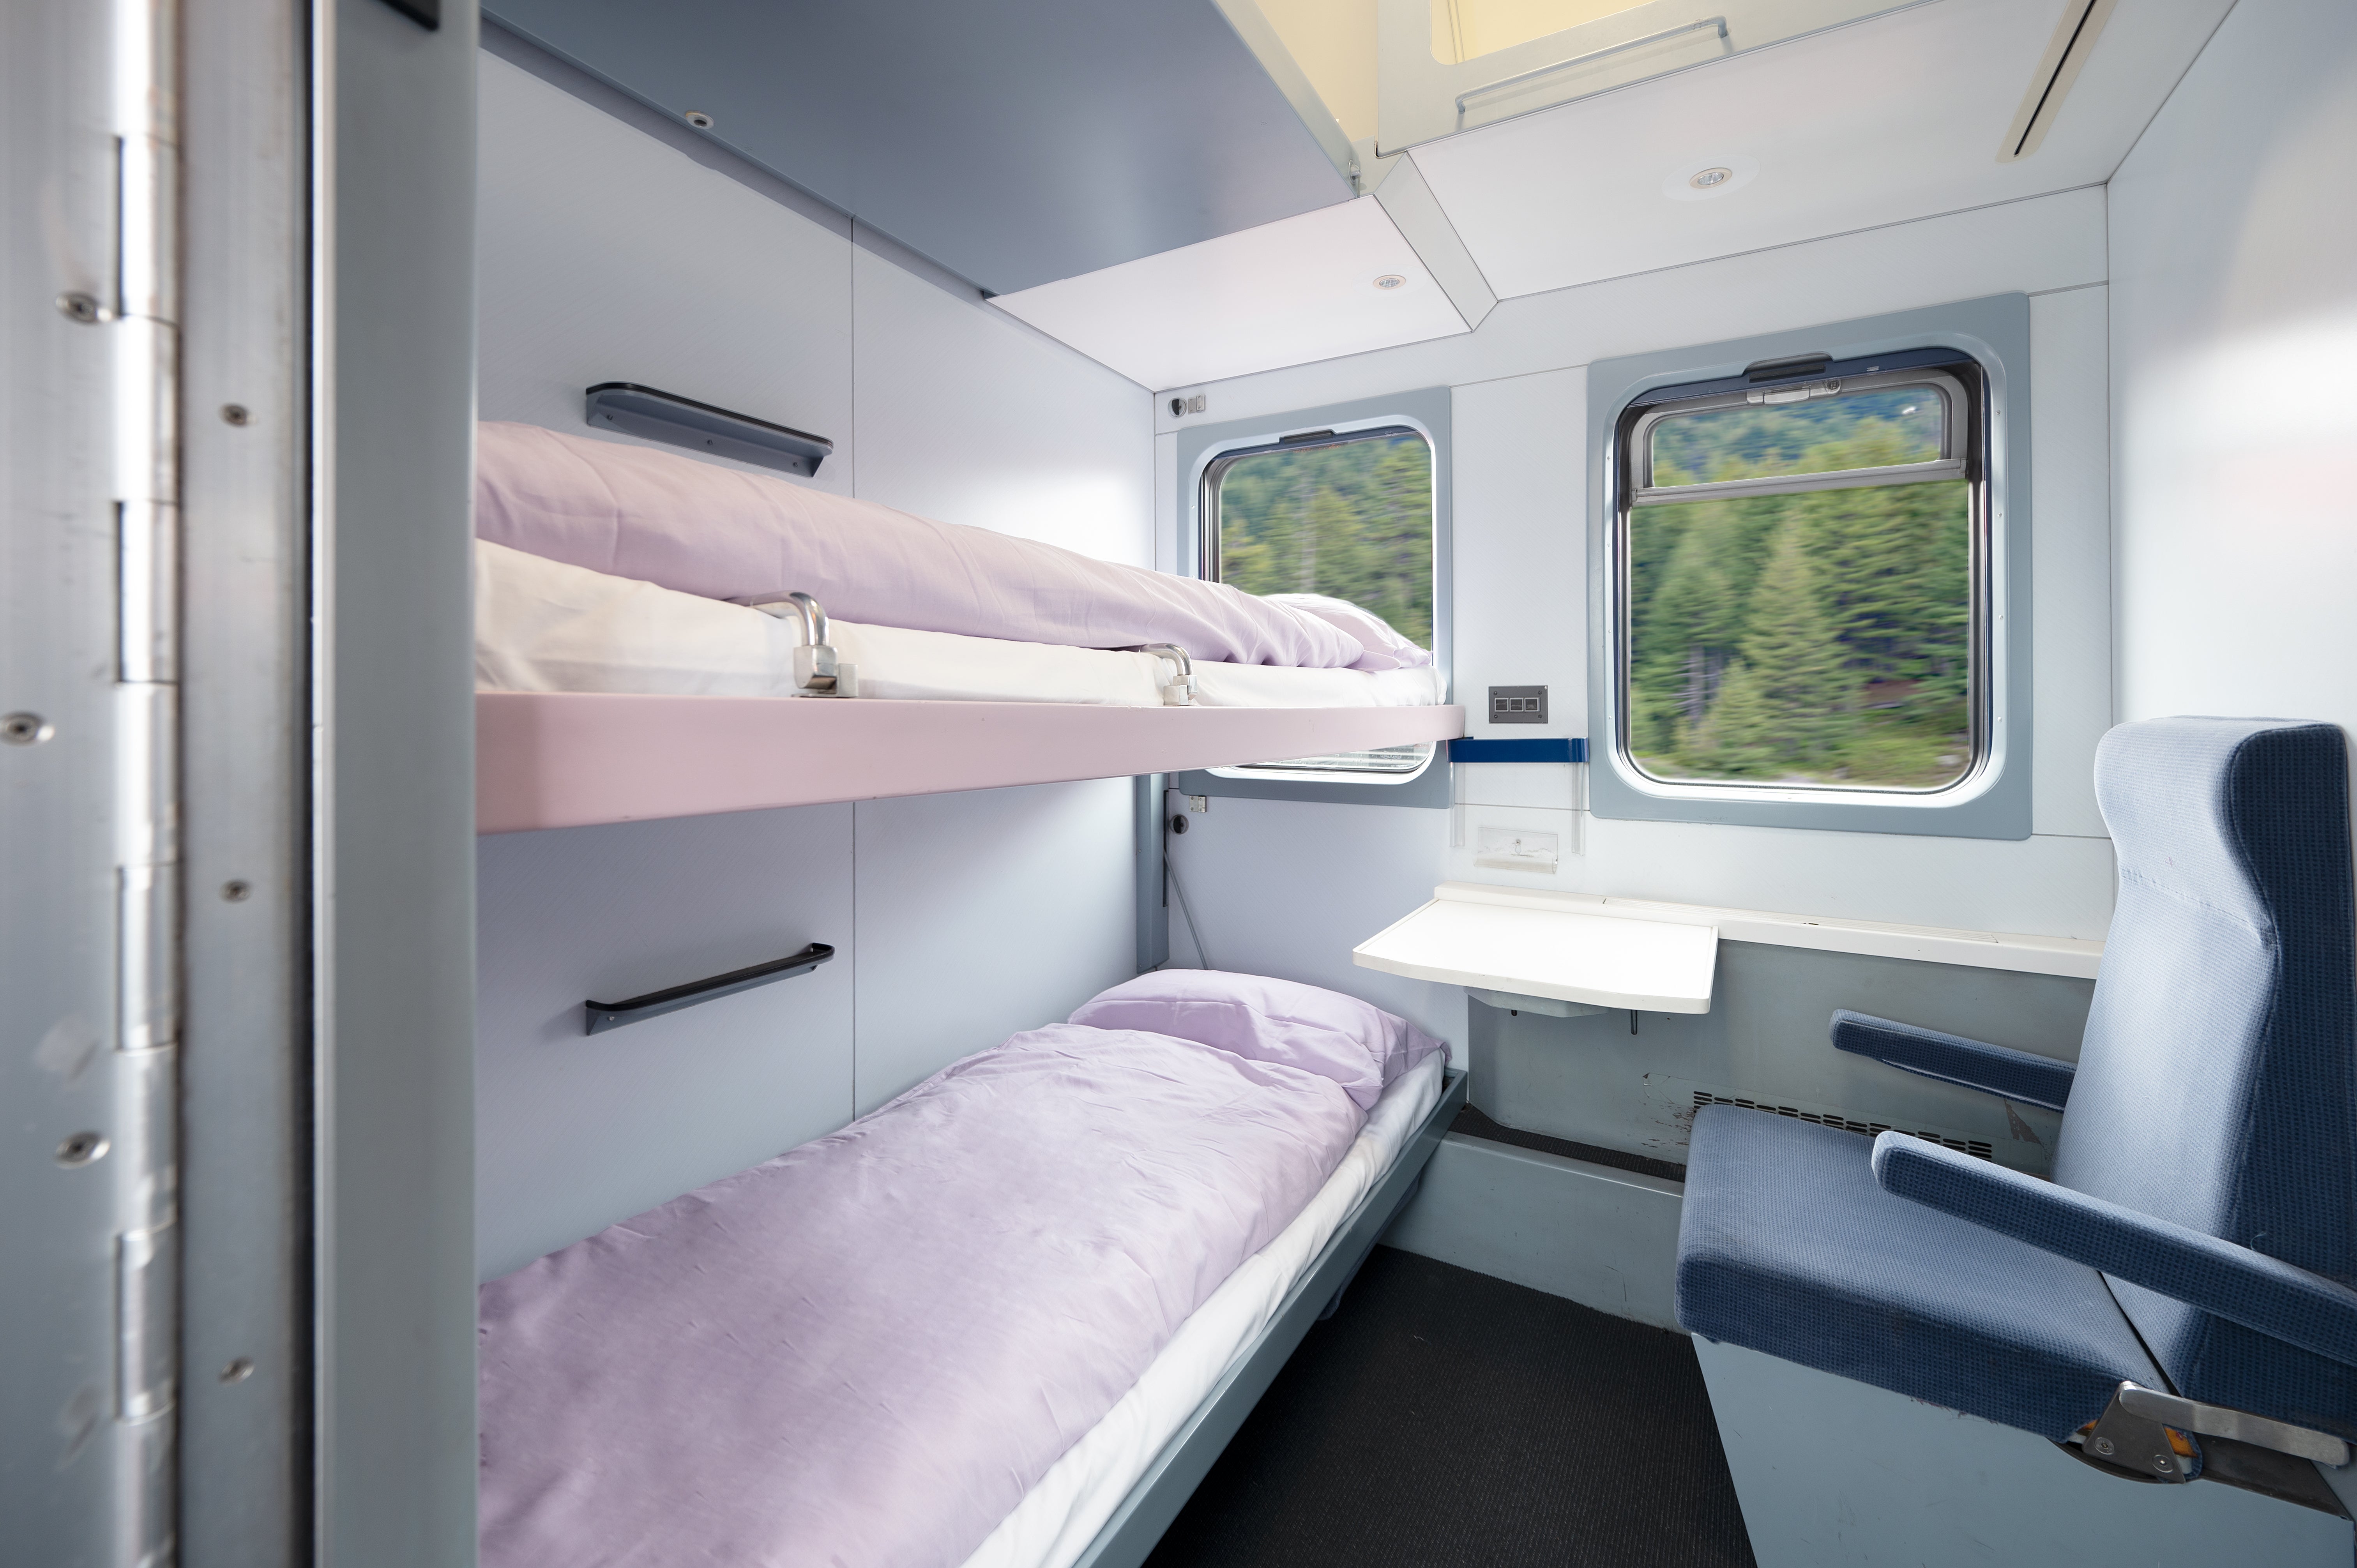 European Sleeper is launching more routes in the coming years